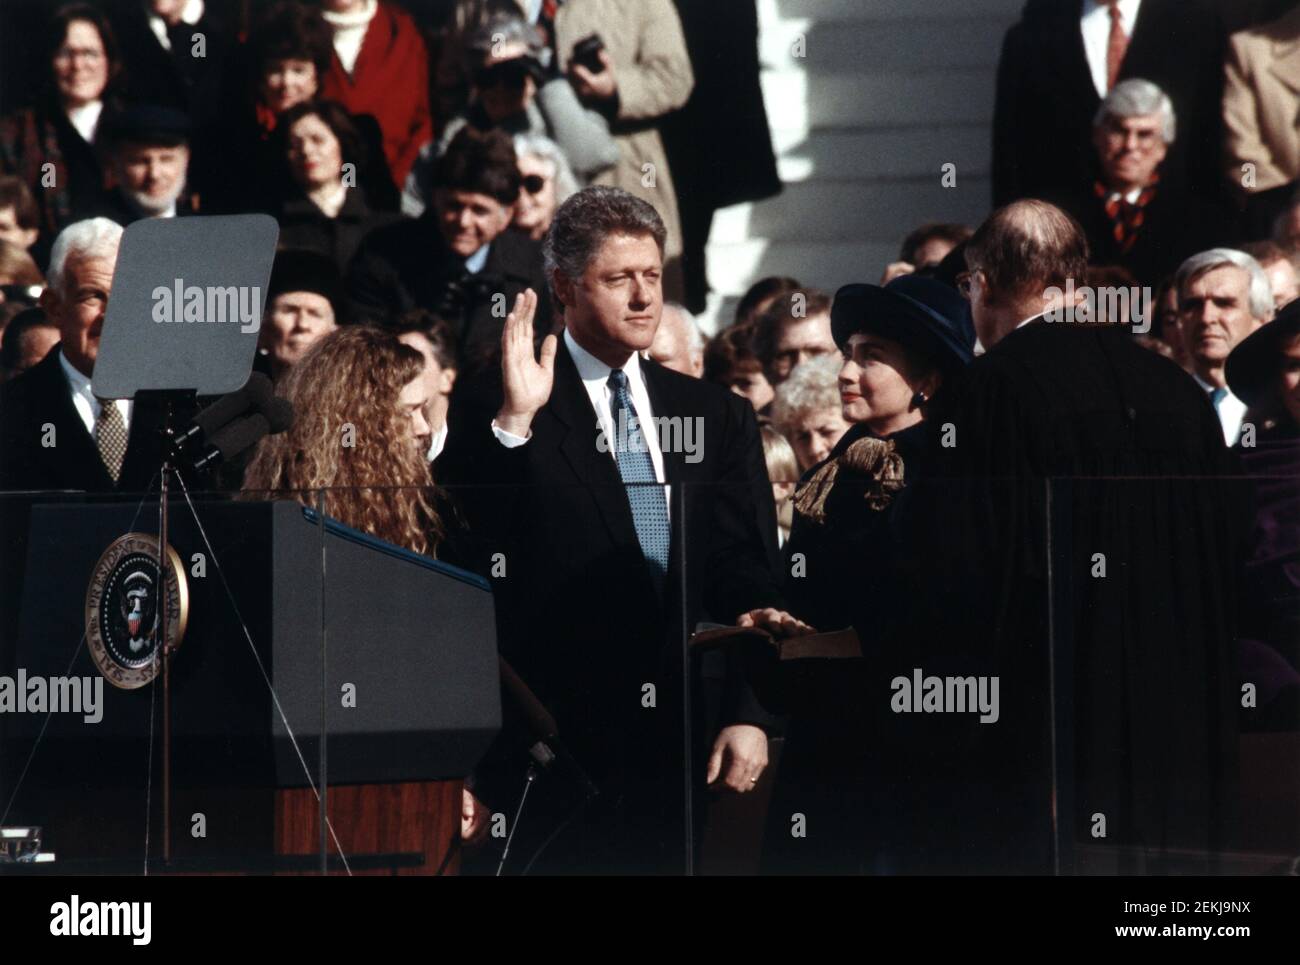 Bill Clinton, standing between Hillary Rodham Clinton and Chelsea Clinton, taking the oath of office of president of the United States, Washington, D.C., USA, Official White House Photograph, January 20, 1993 Stock Photo